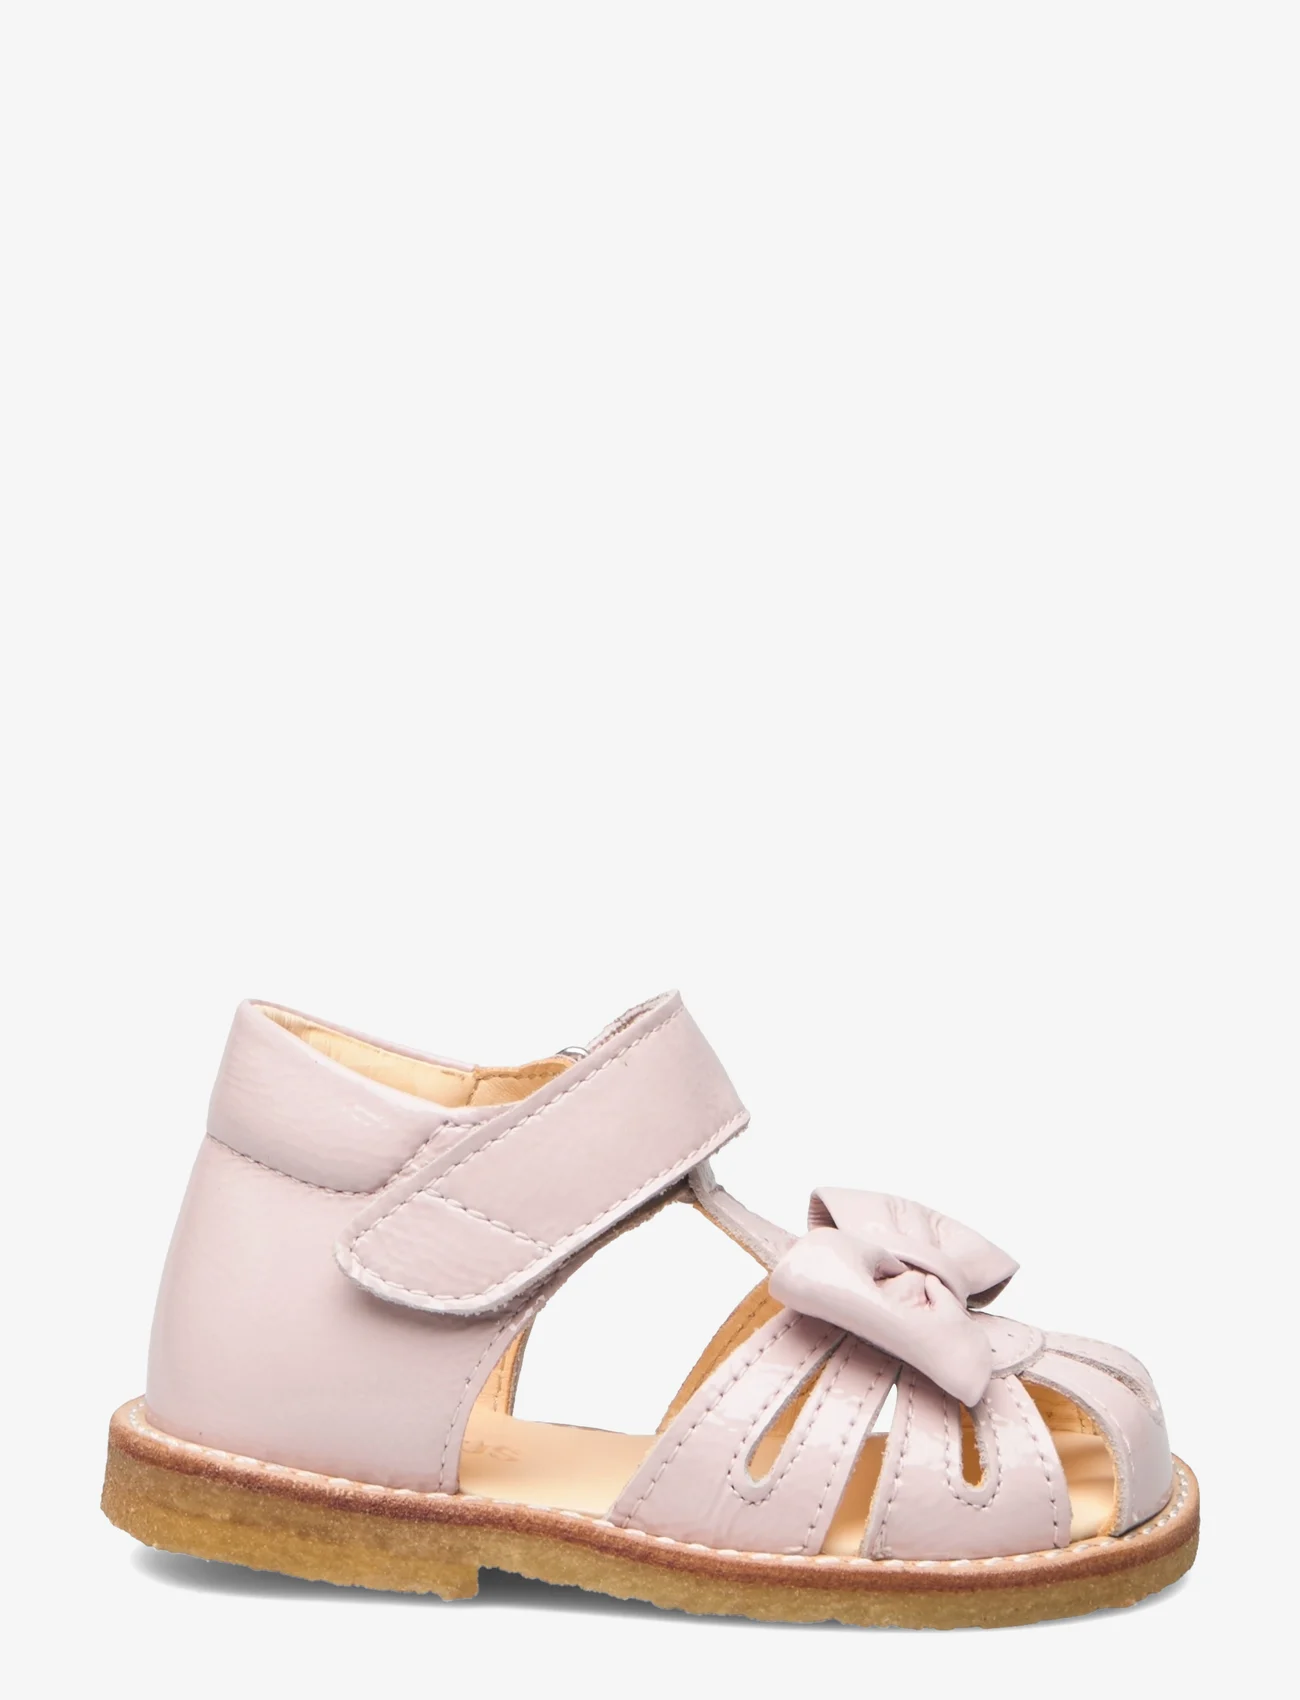 ANGULUS - Sandals - flat - closed toe - - sommerschnäppchen - 2704 pale rose - 1